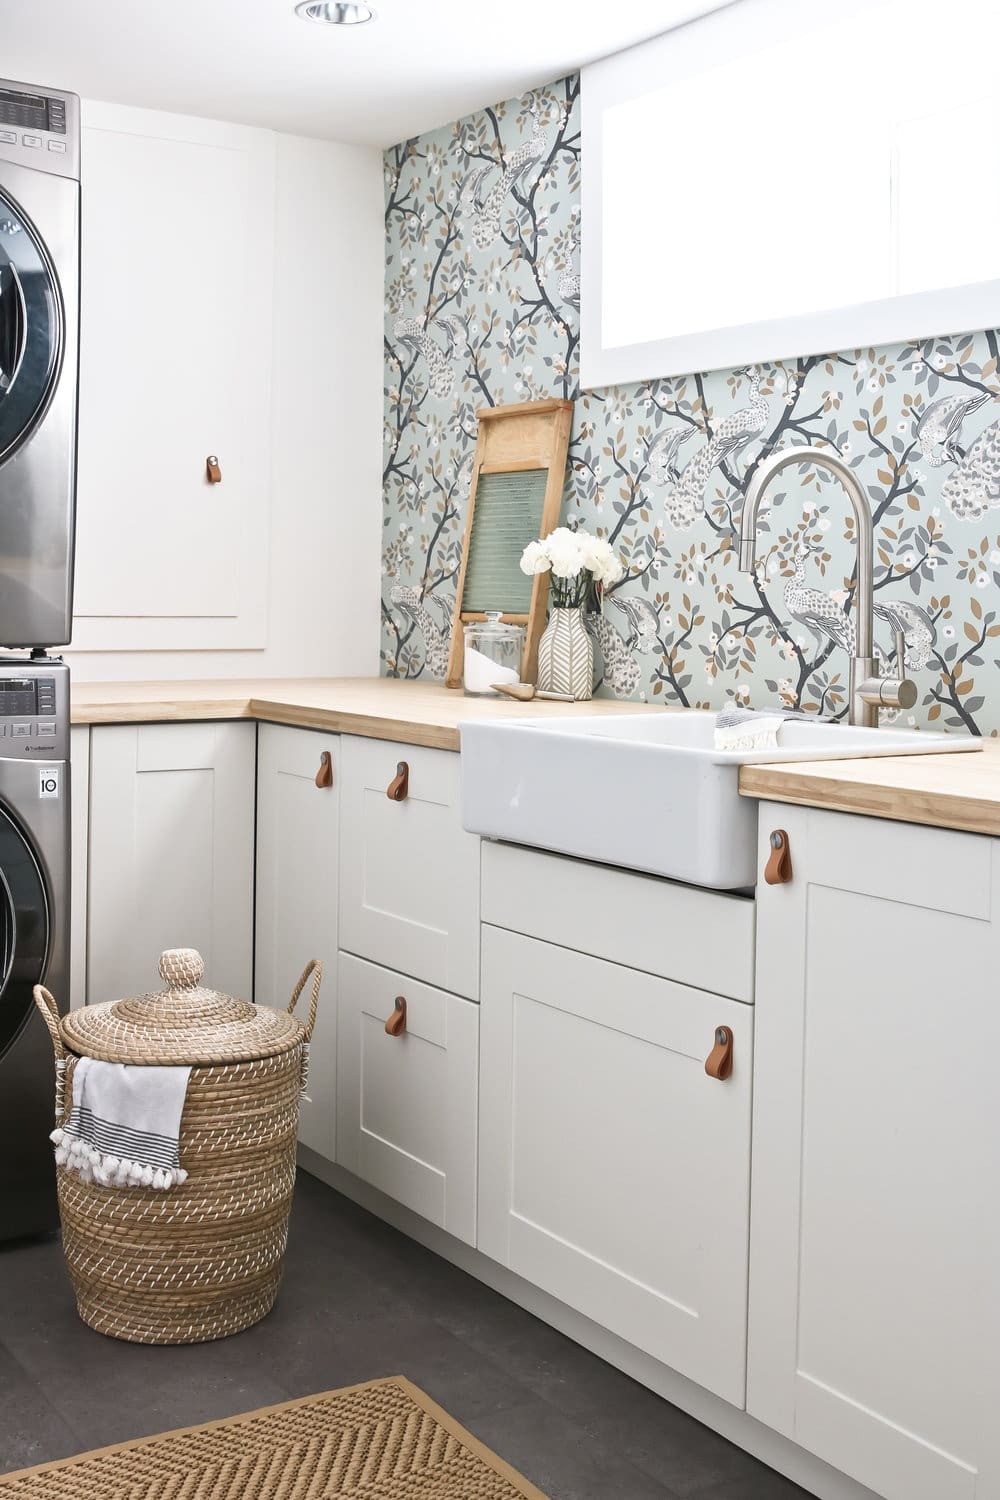 laundry room with floral wallpaper design and leather handles on cabinets